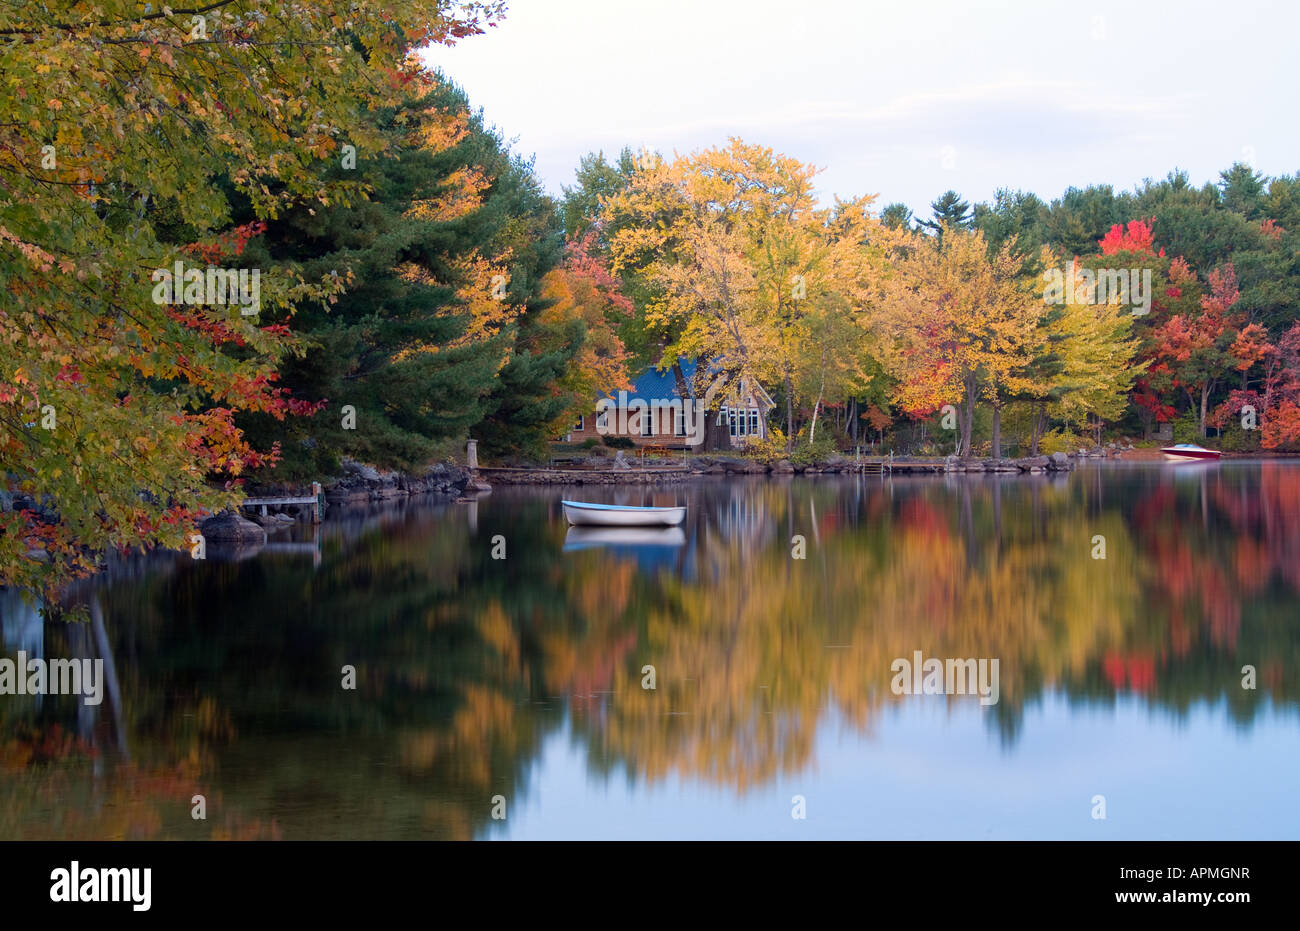 Peaceful quiet scene of lake and small boat in Long Lake in Bridgton Maine in New England colorful scene with reflections Stock Photo